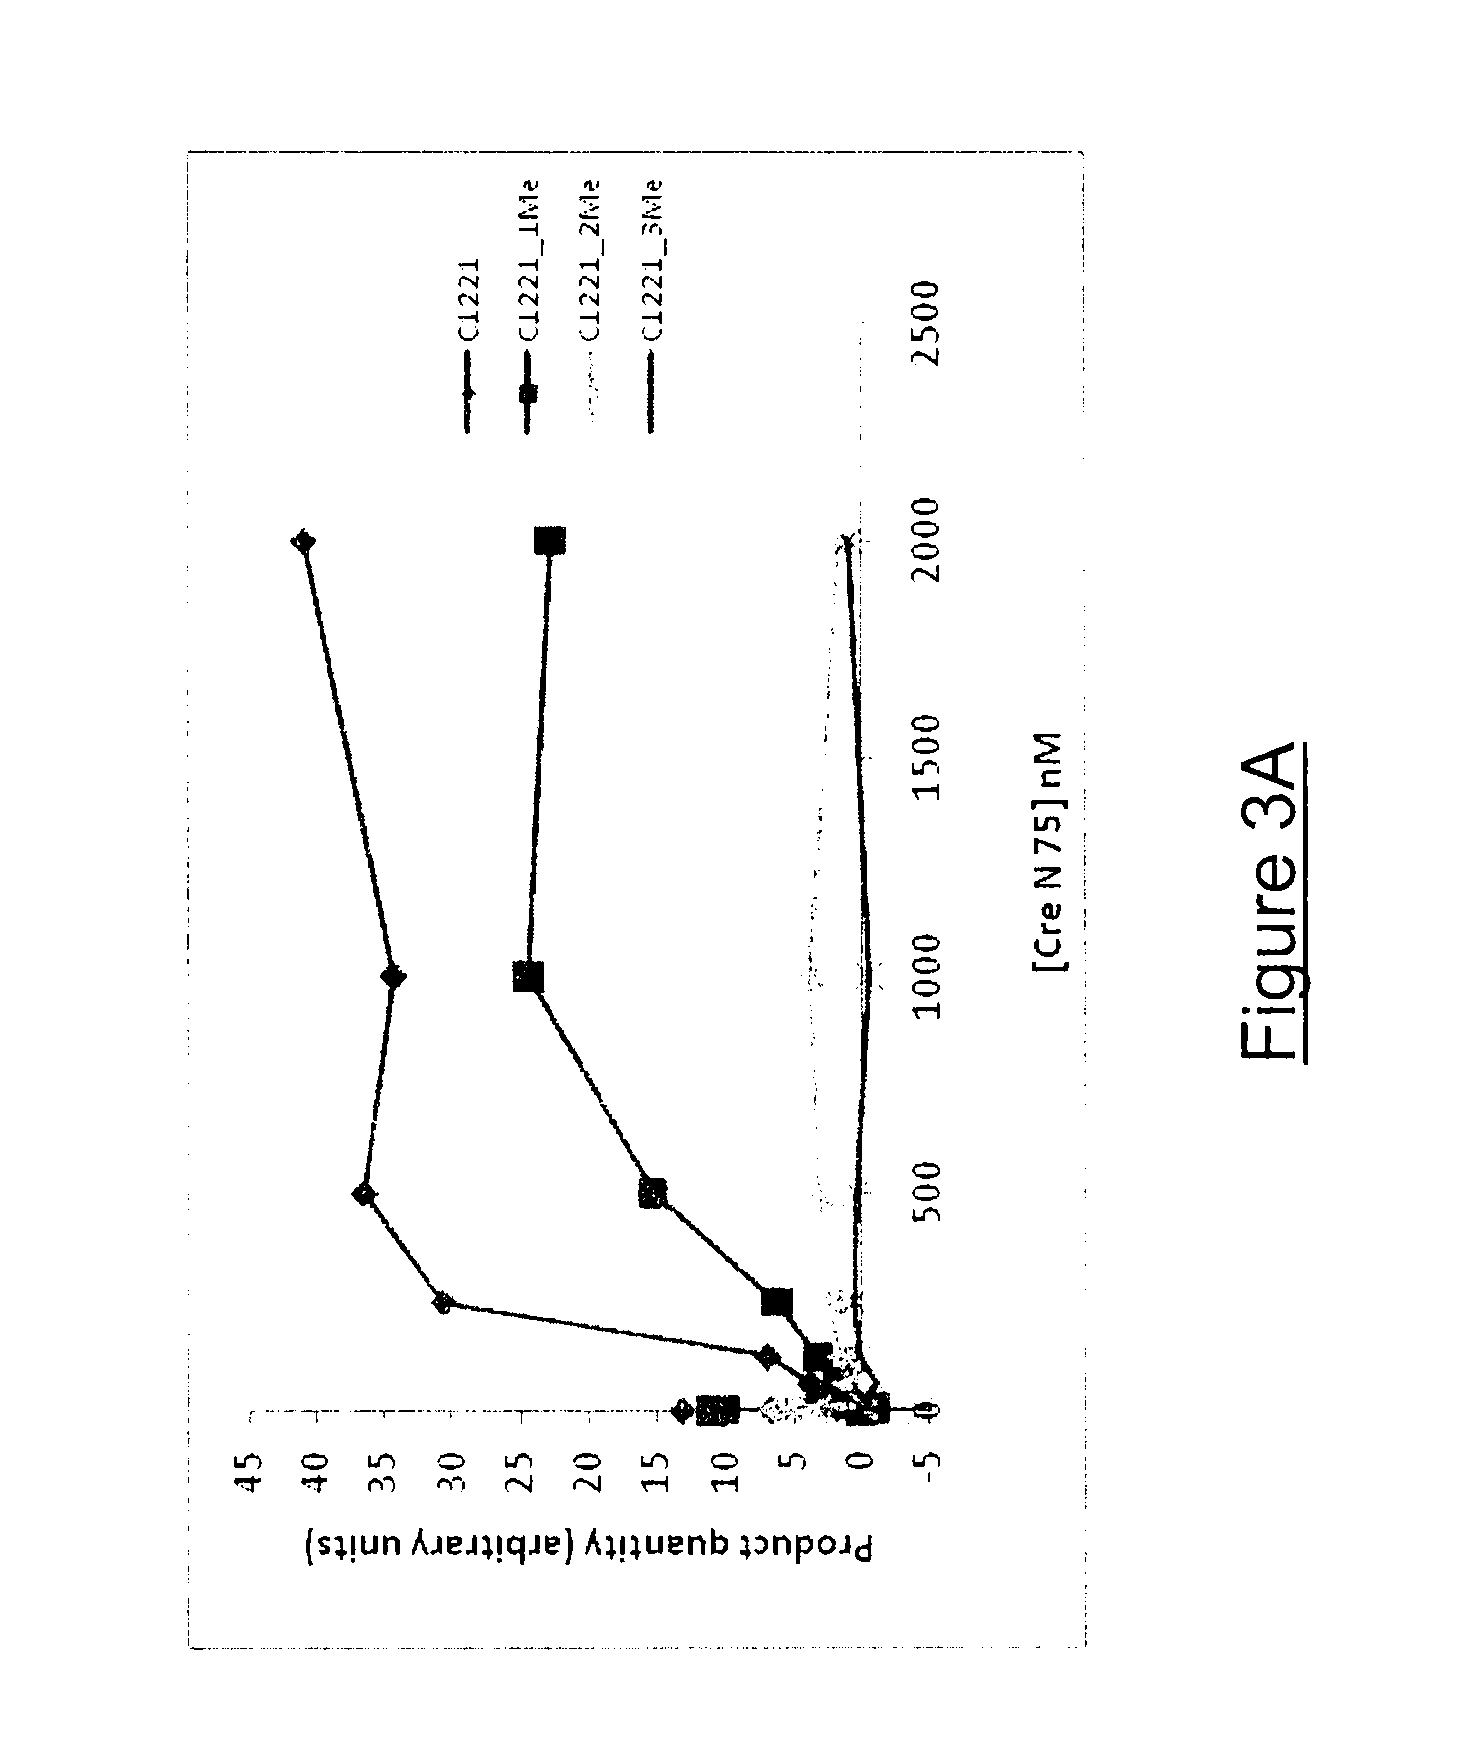 Method for improving cleavage of DNA by endonuclease sensitive to methylation